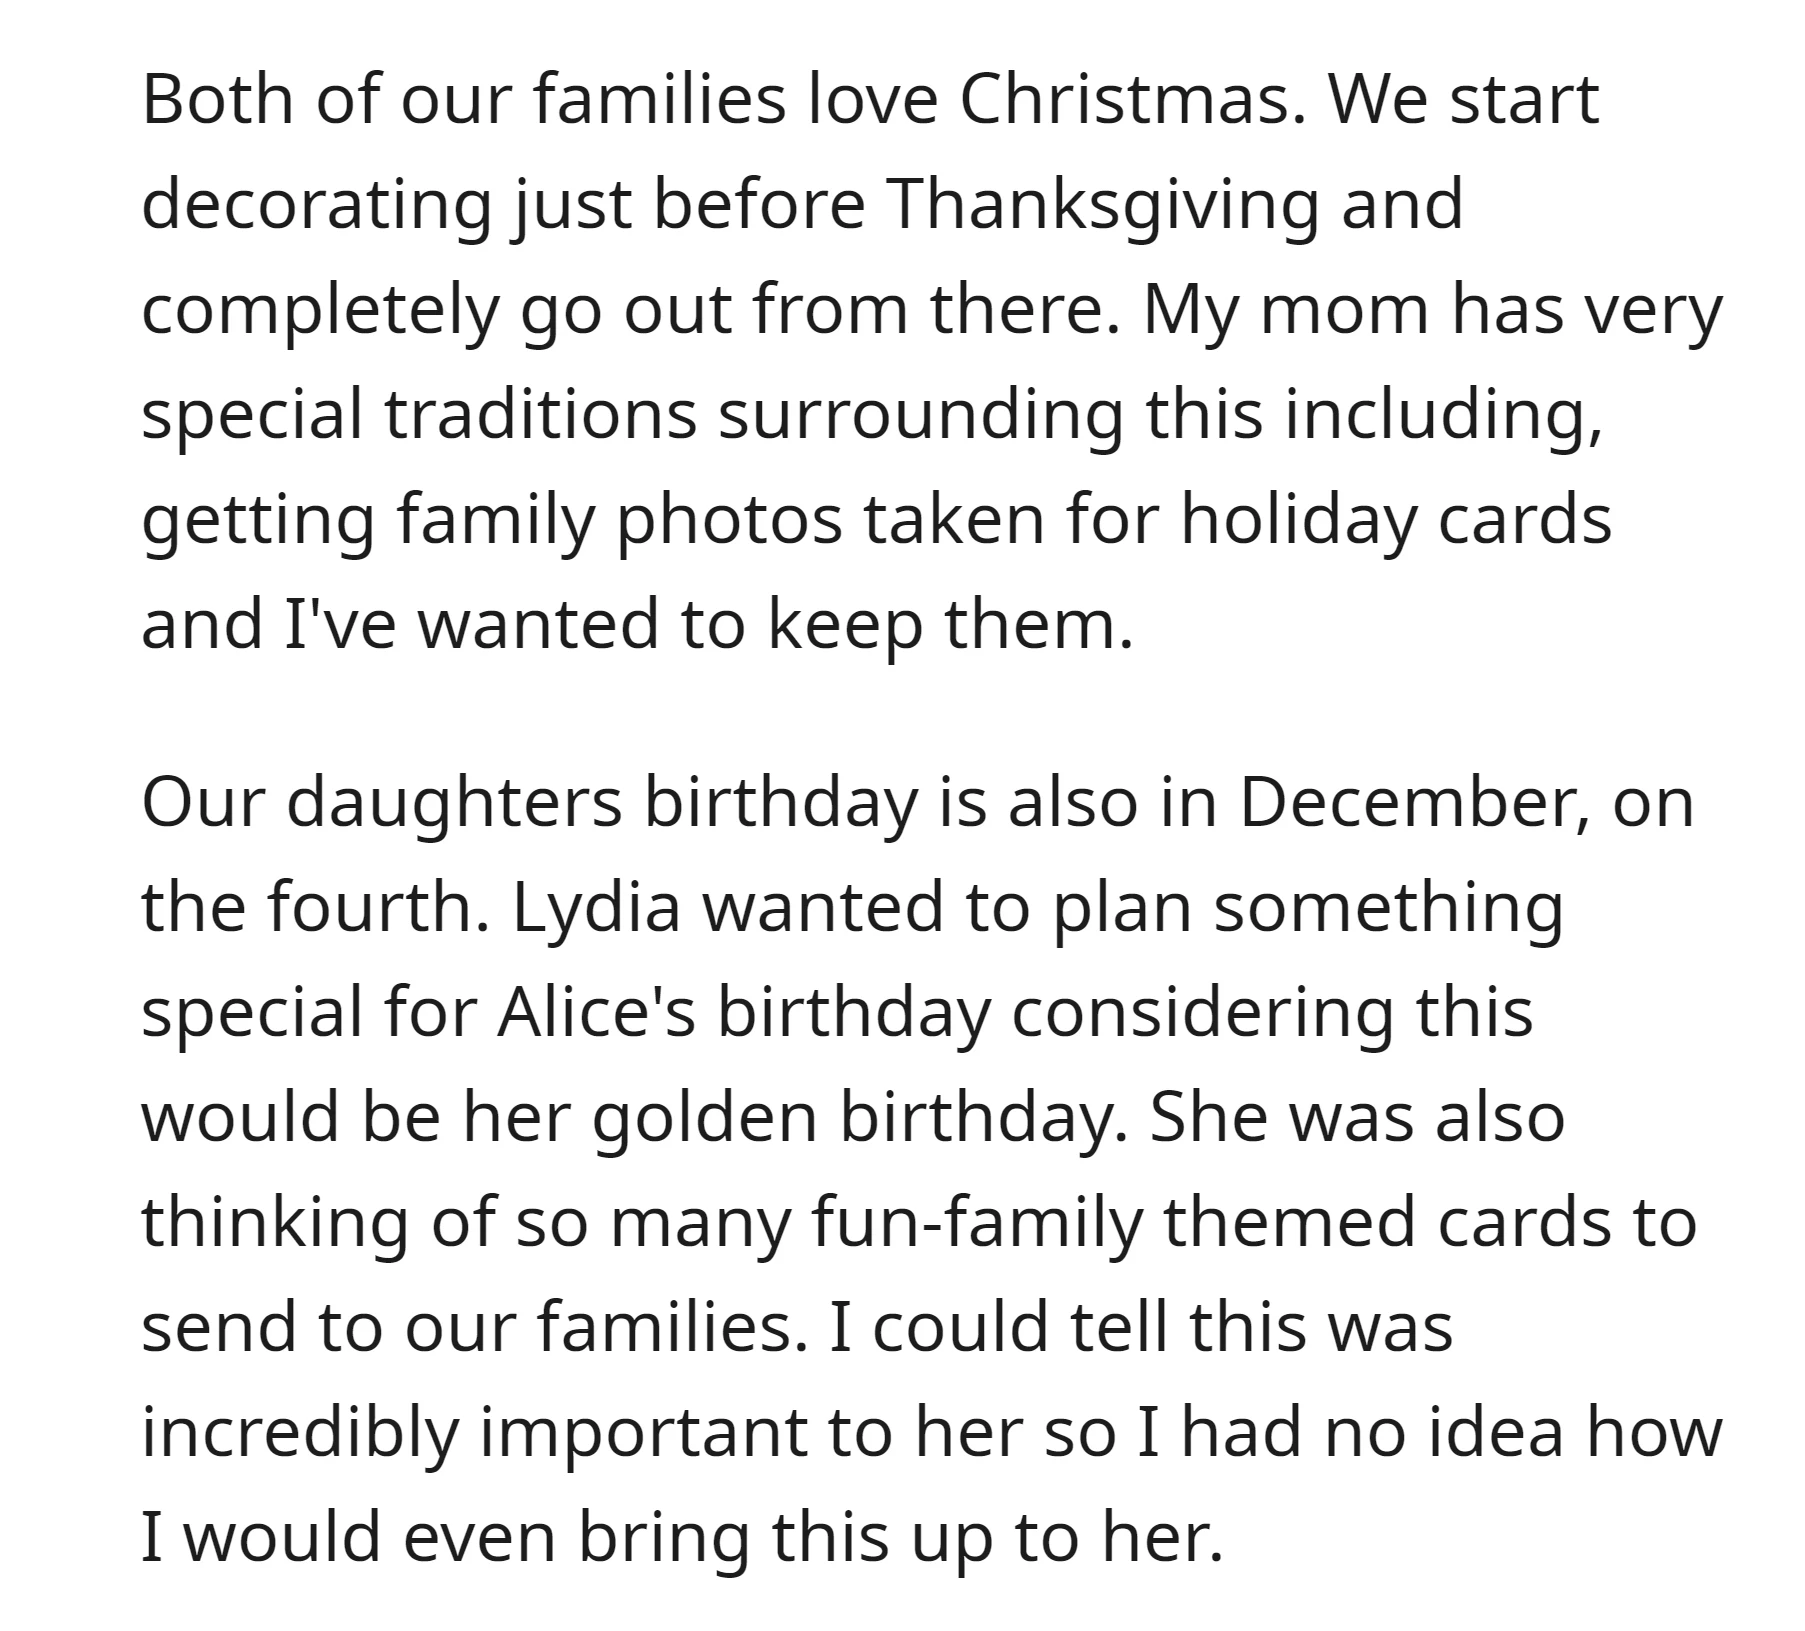 His family has special traditions, one of which is getting family photos taken for holiday cards